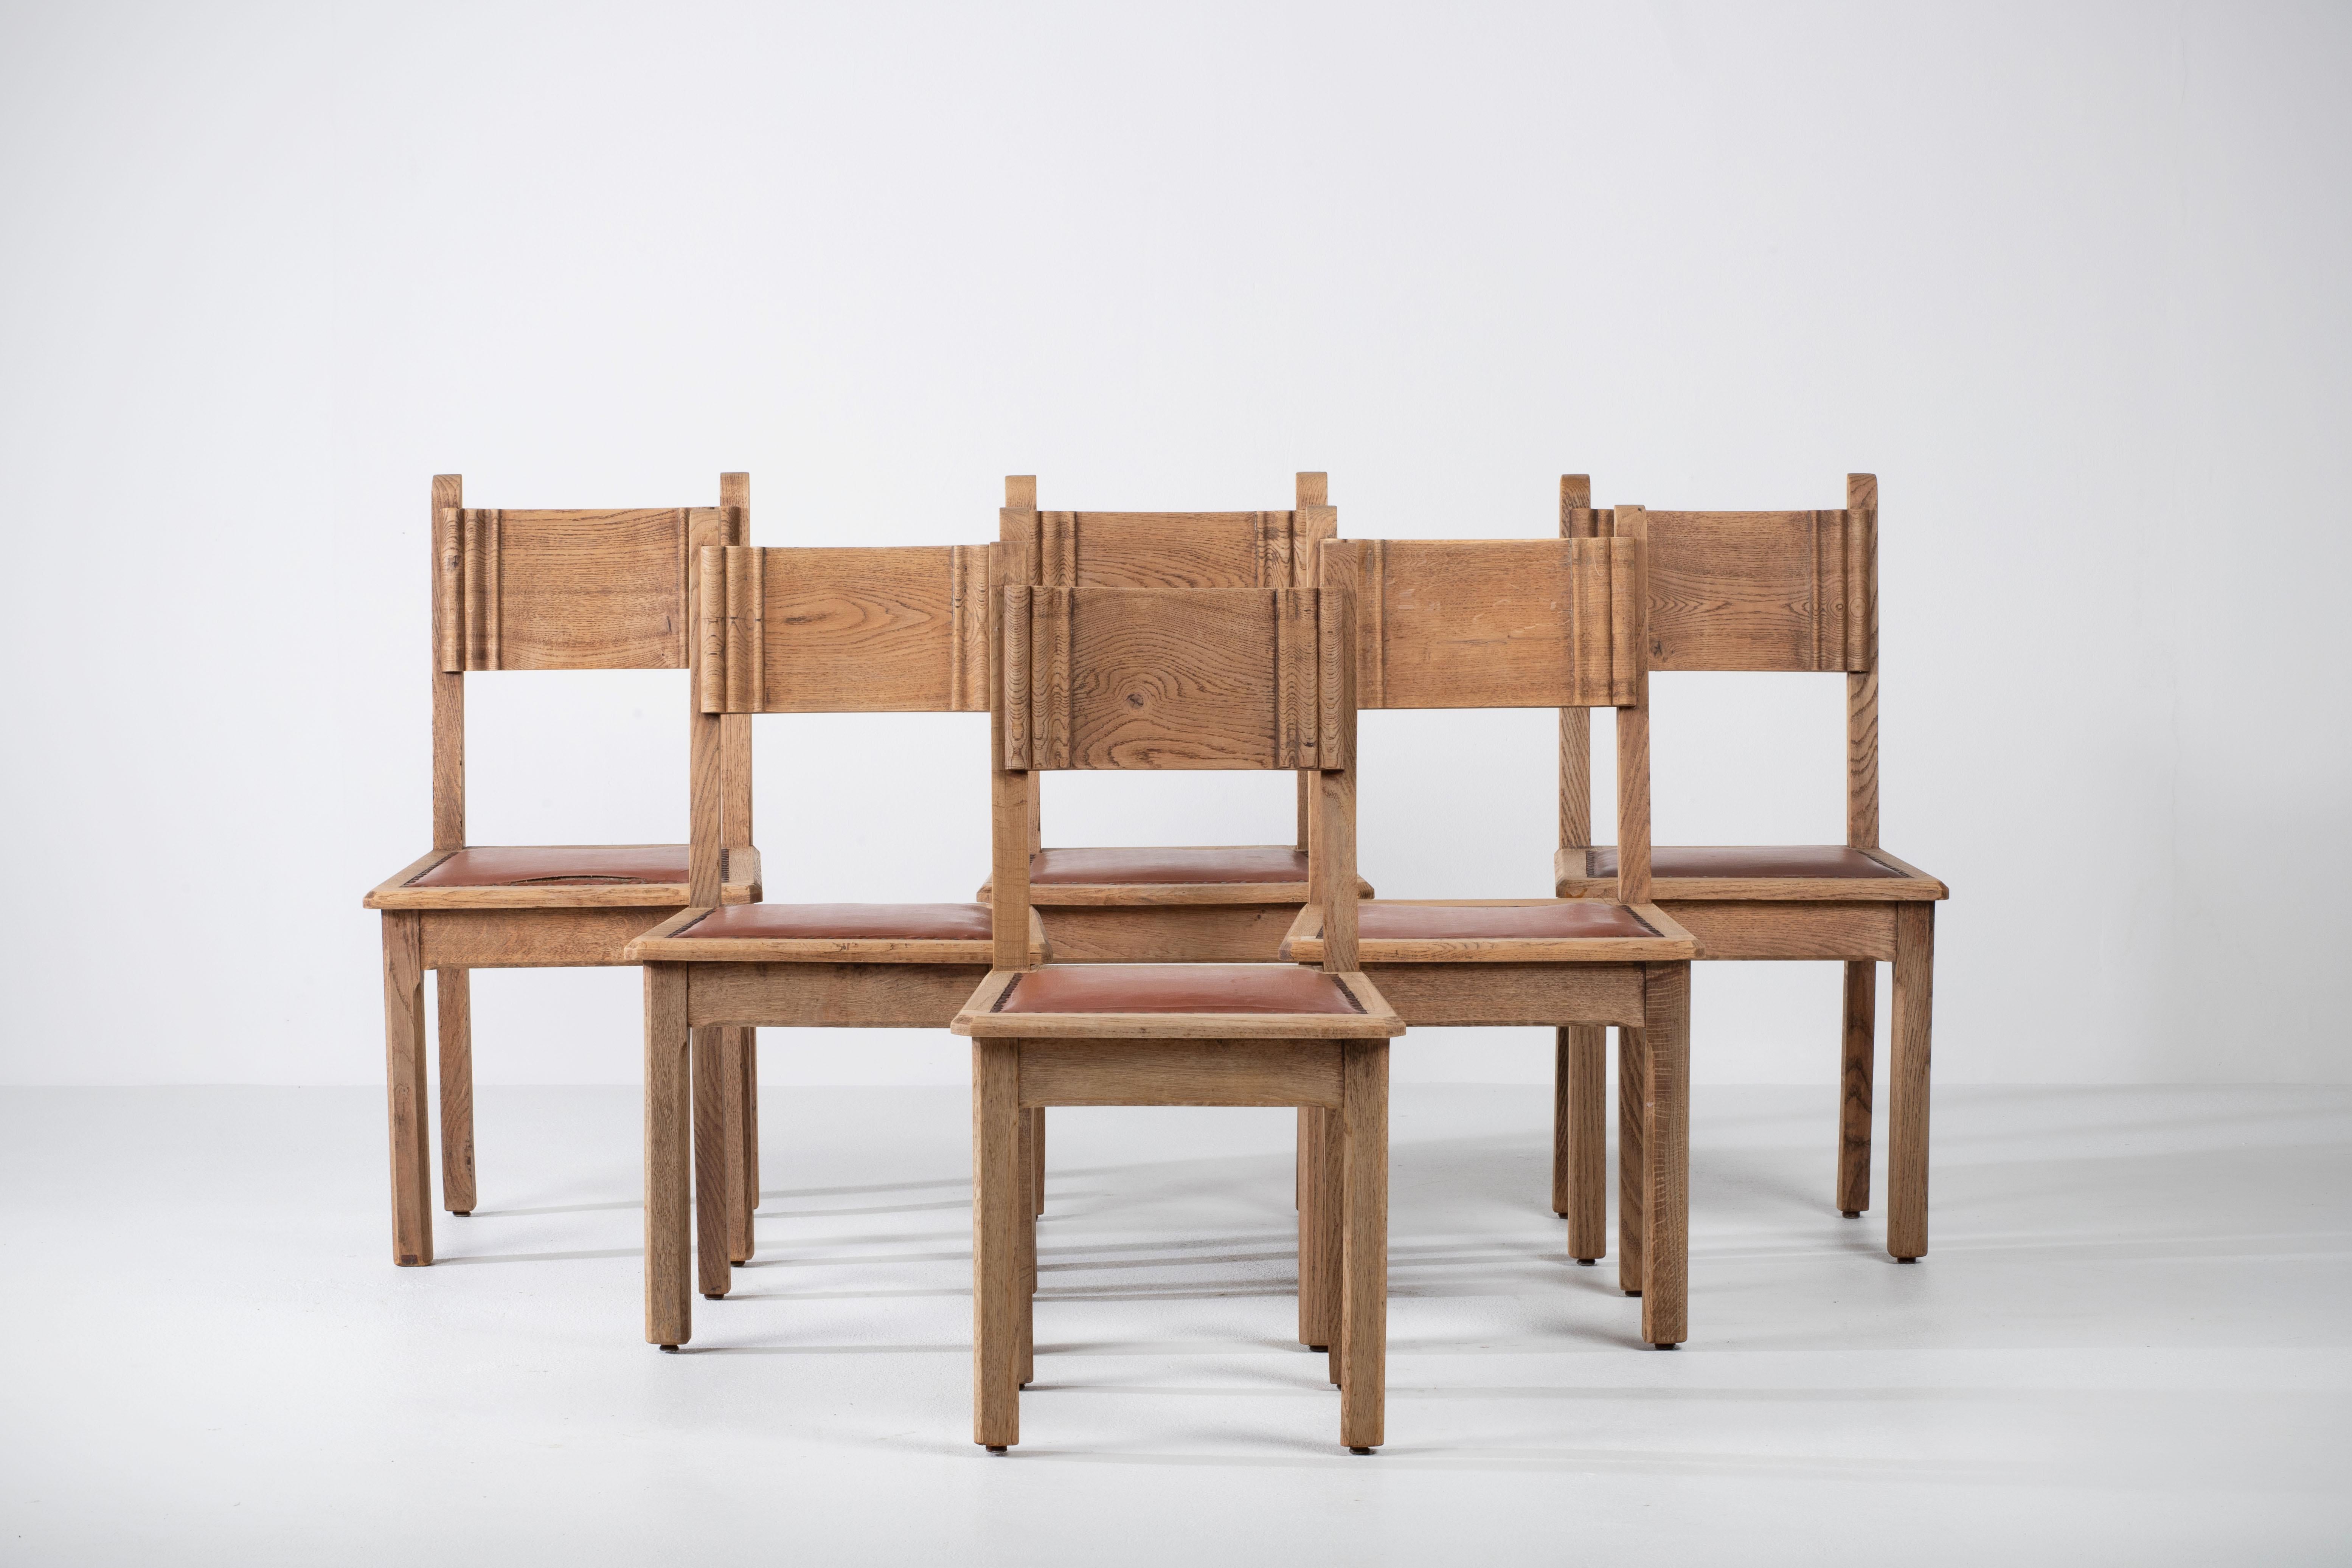 This set of six French Art Deco dining chairs in solid oak was created in the 1940s with a Charles Dudouyt inspiration.

We can clearly see the work of the French school of the 1940s. The detailed and graphic designed backrest panels will meet the